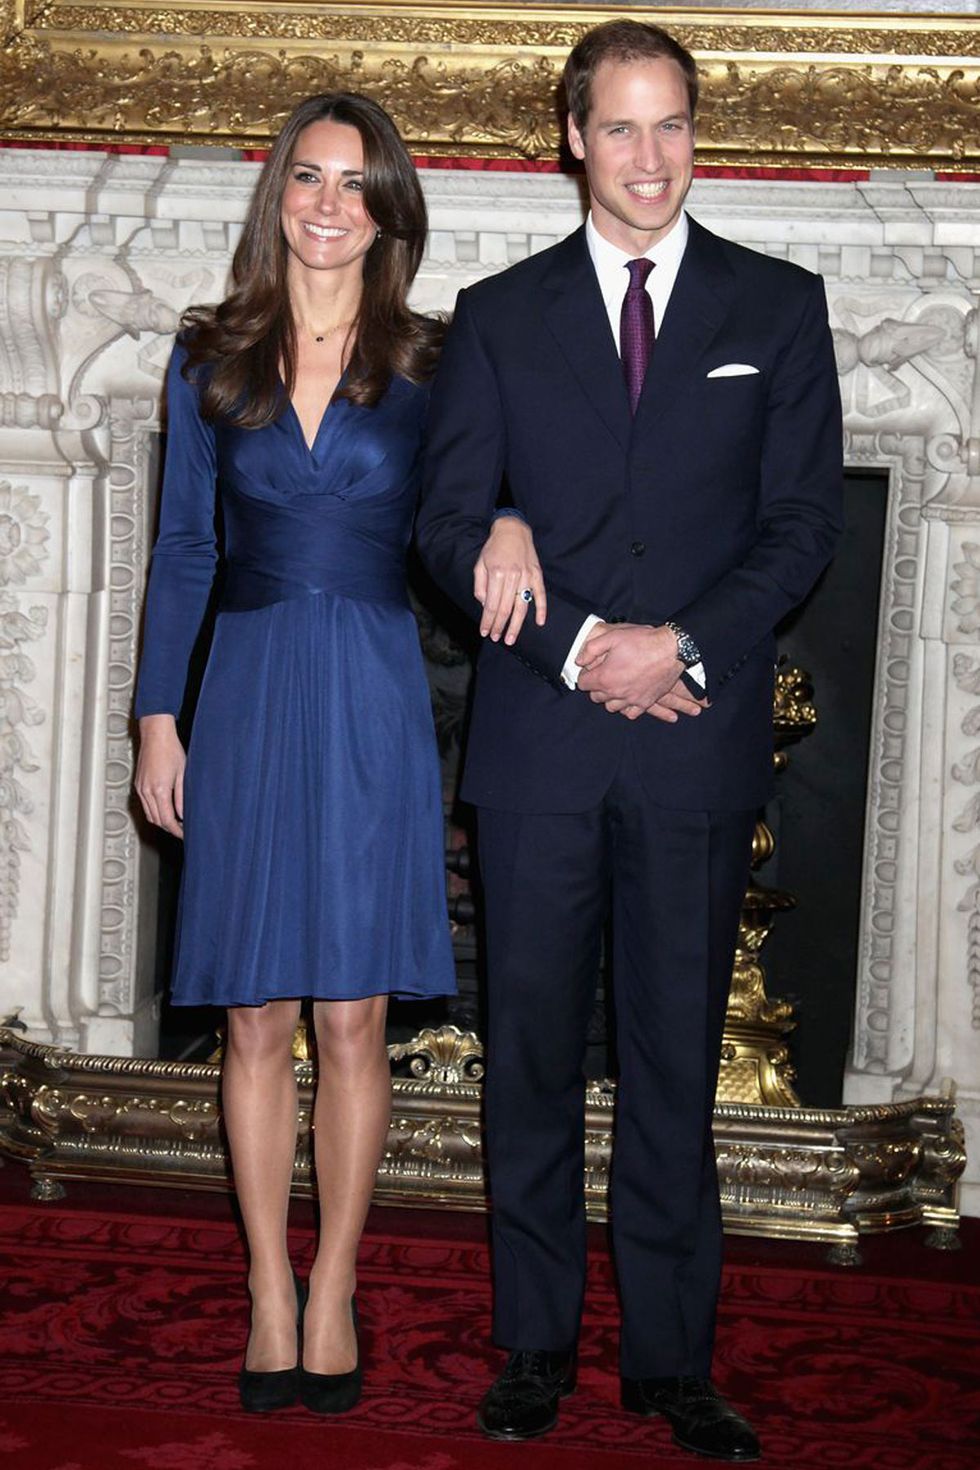 William and Kate spilled details of their break up in their engagement interview